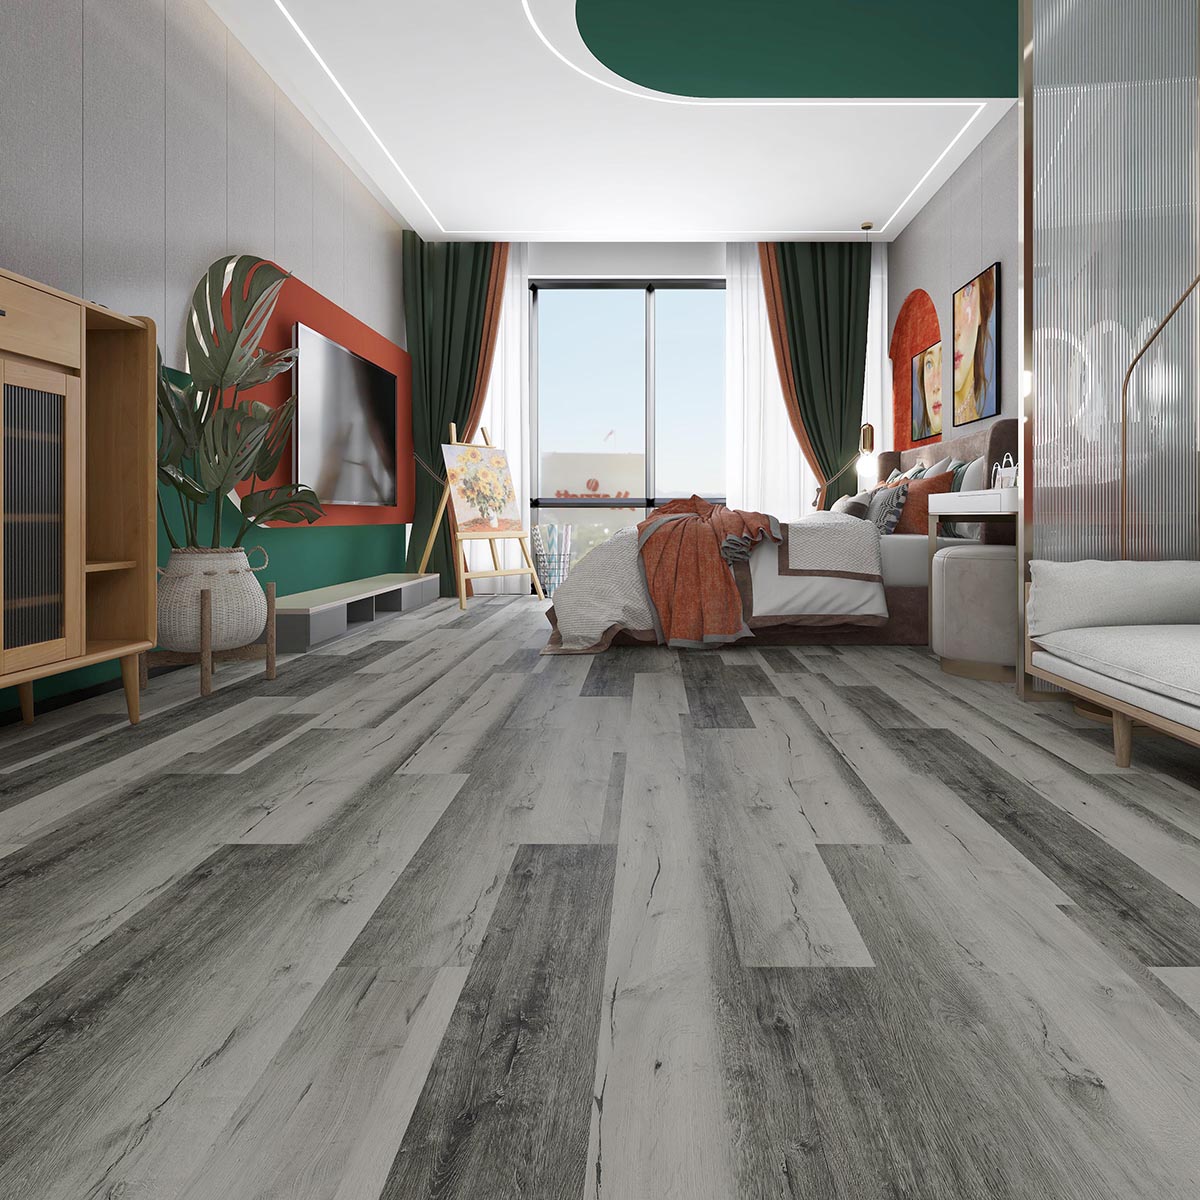 New Arrival China Spc Floor Tiles -
 SPC flooring balances style and functionality – TopJoy